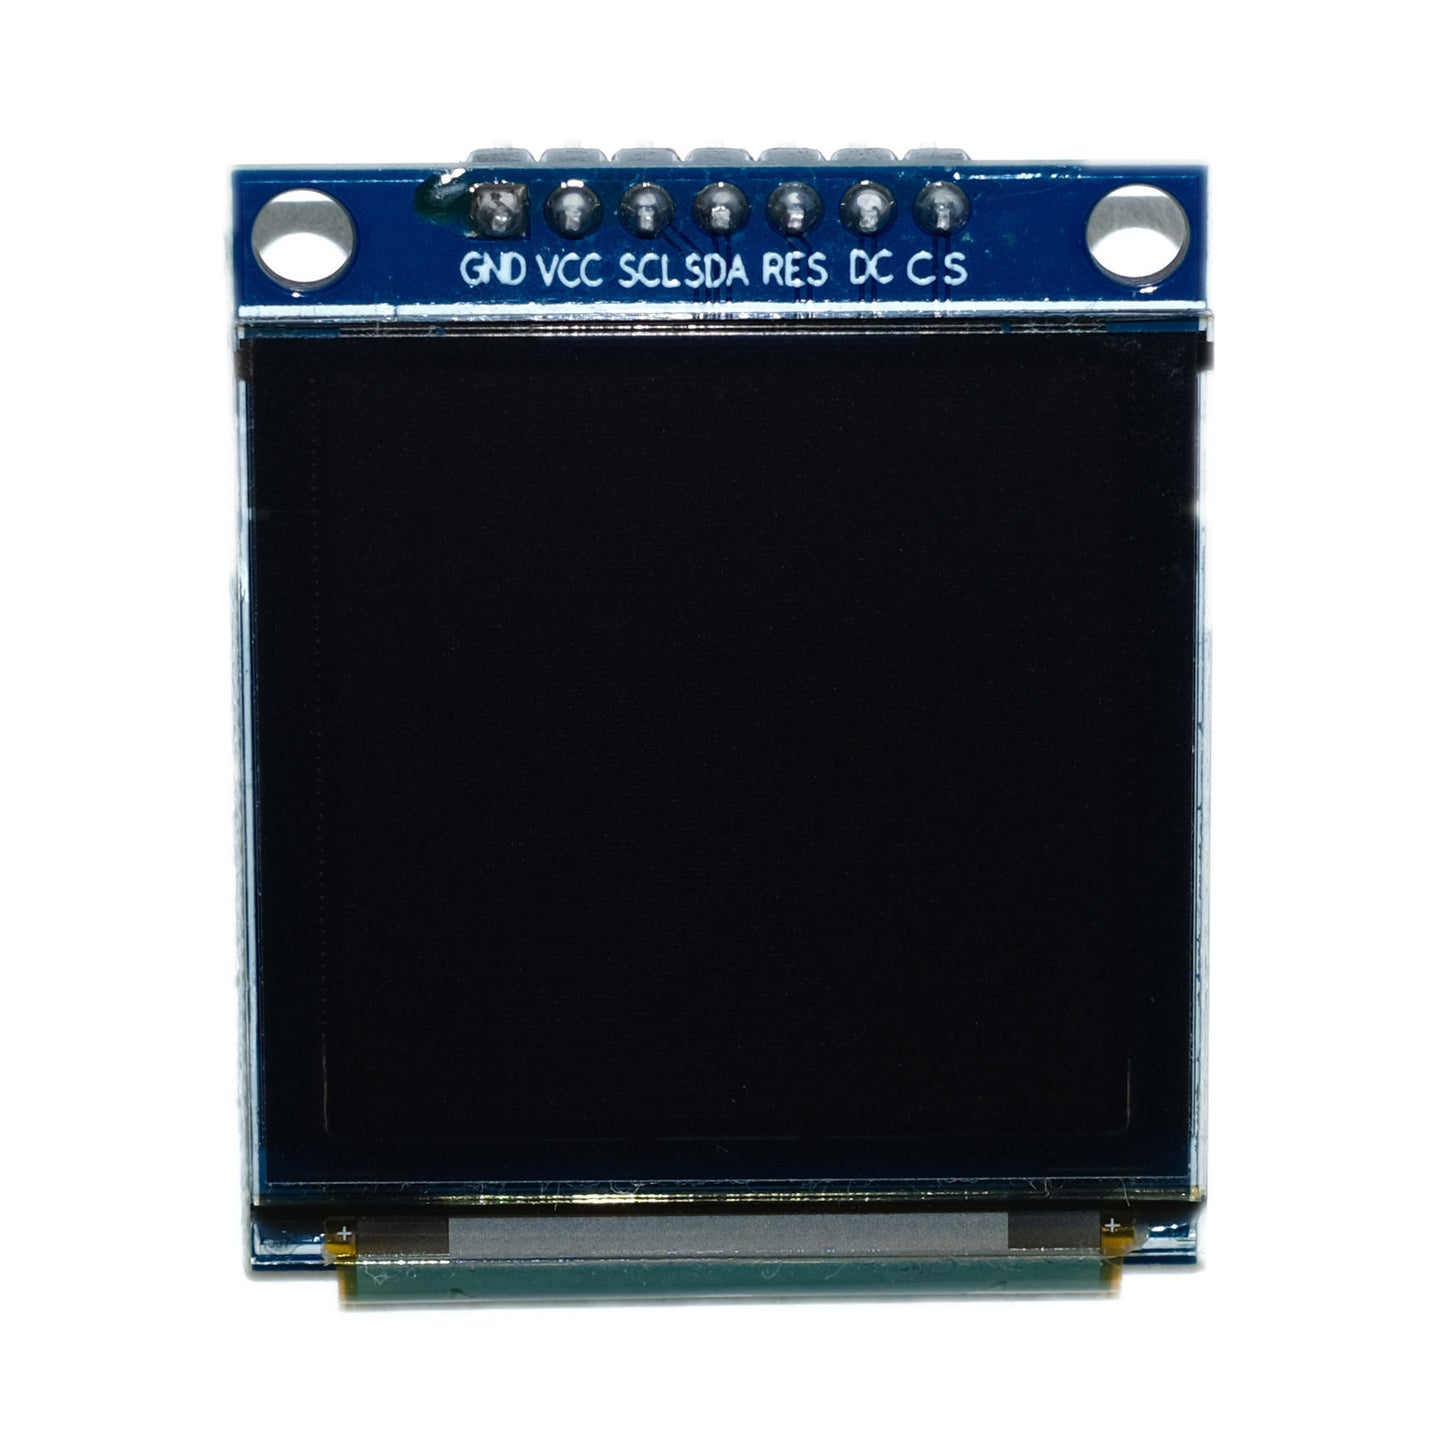 1.5-inch OLED Graphic Display Module, 128x128 resolution, RGB color, SPI interface